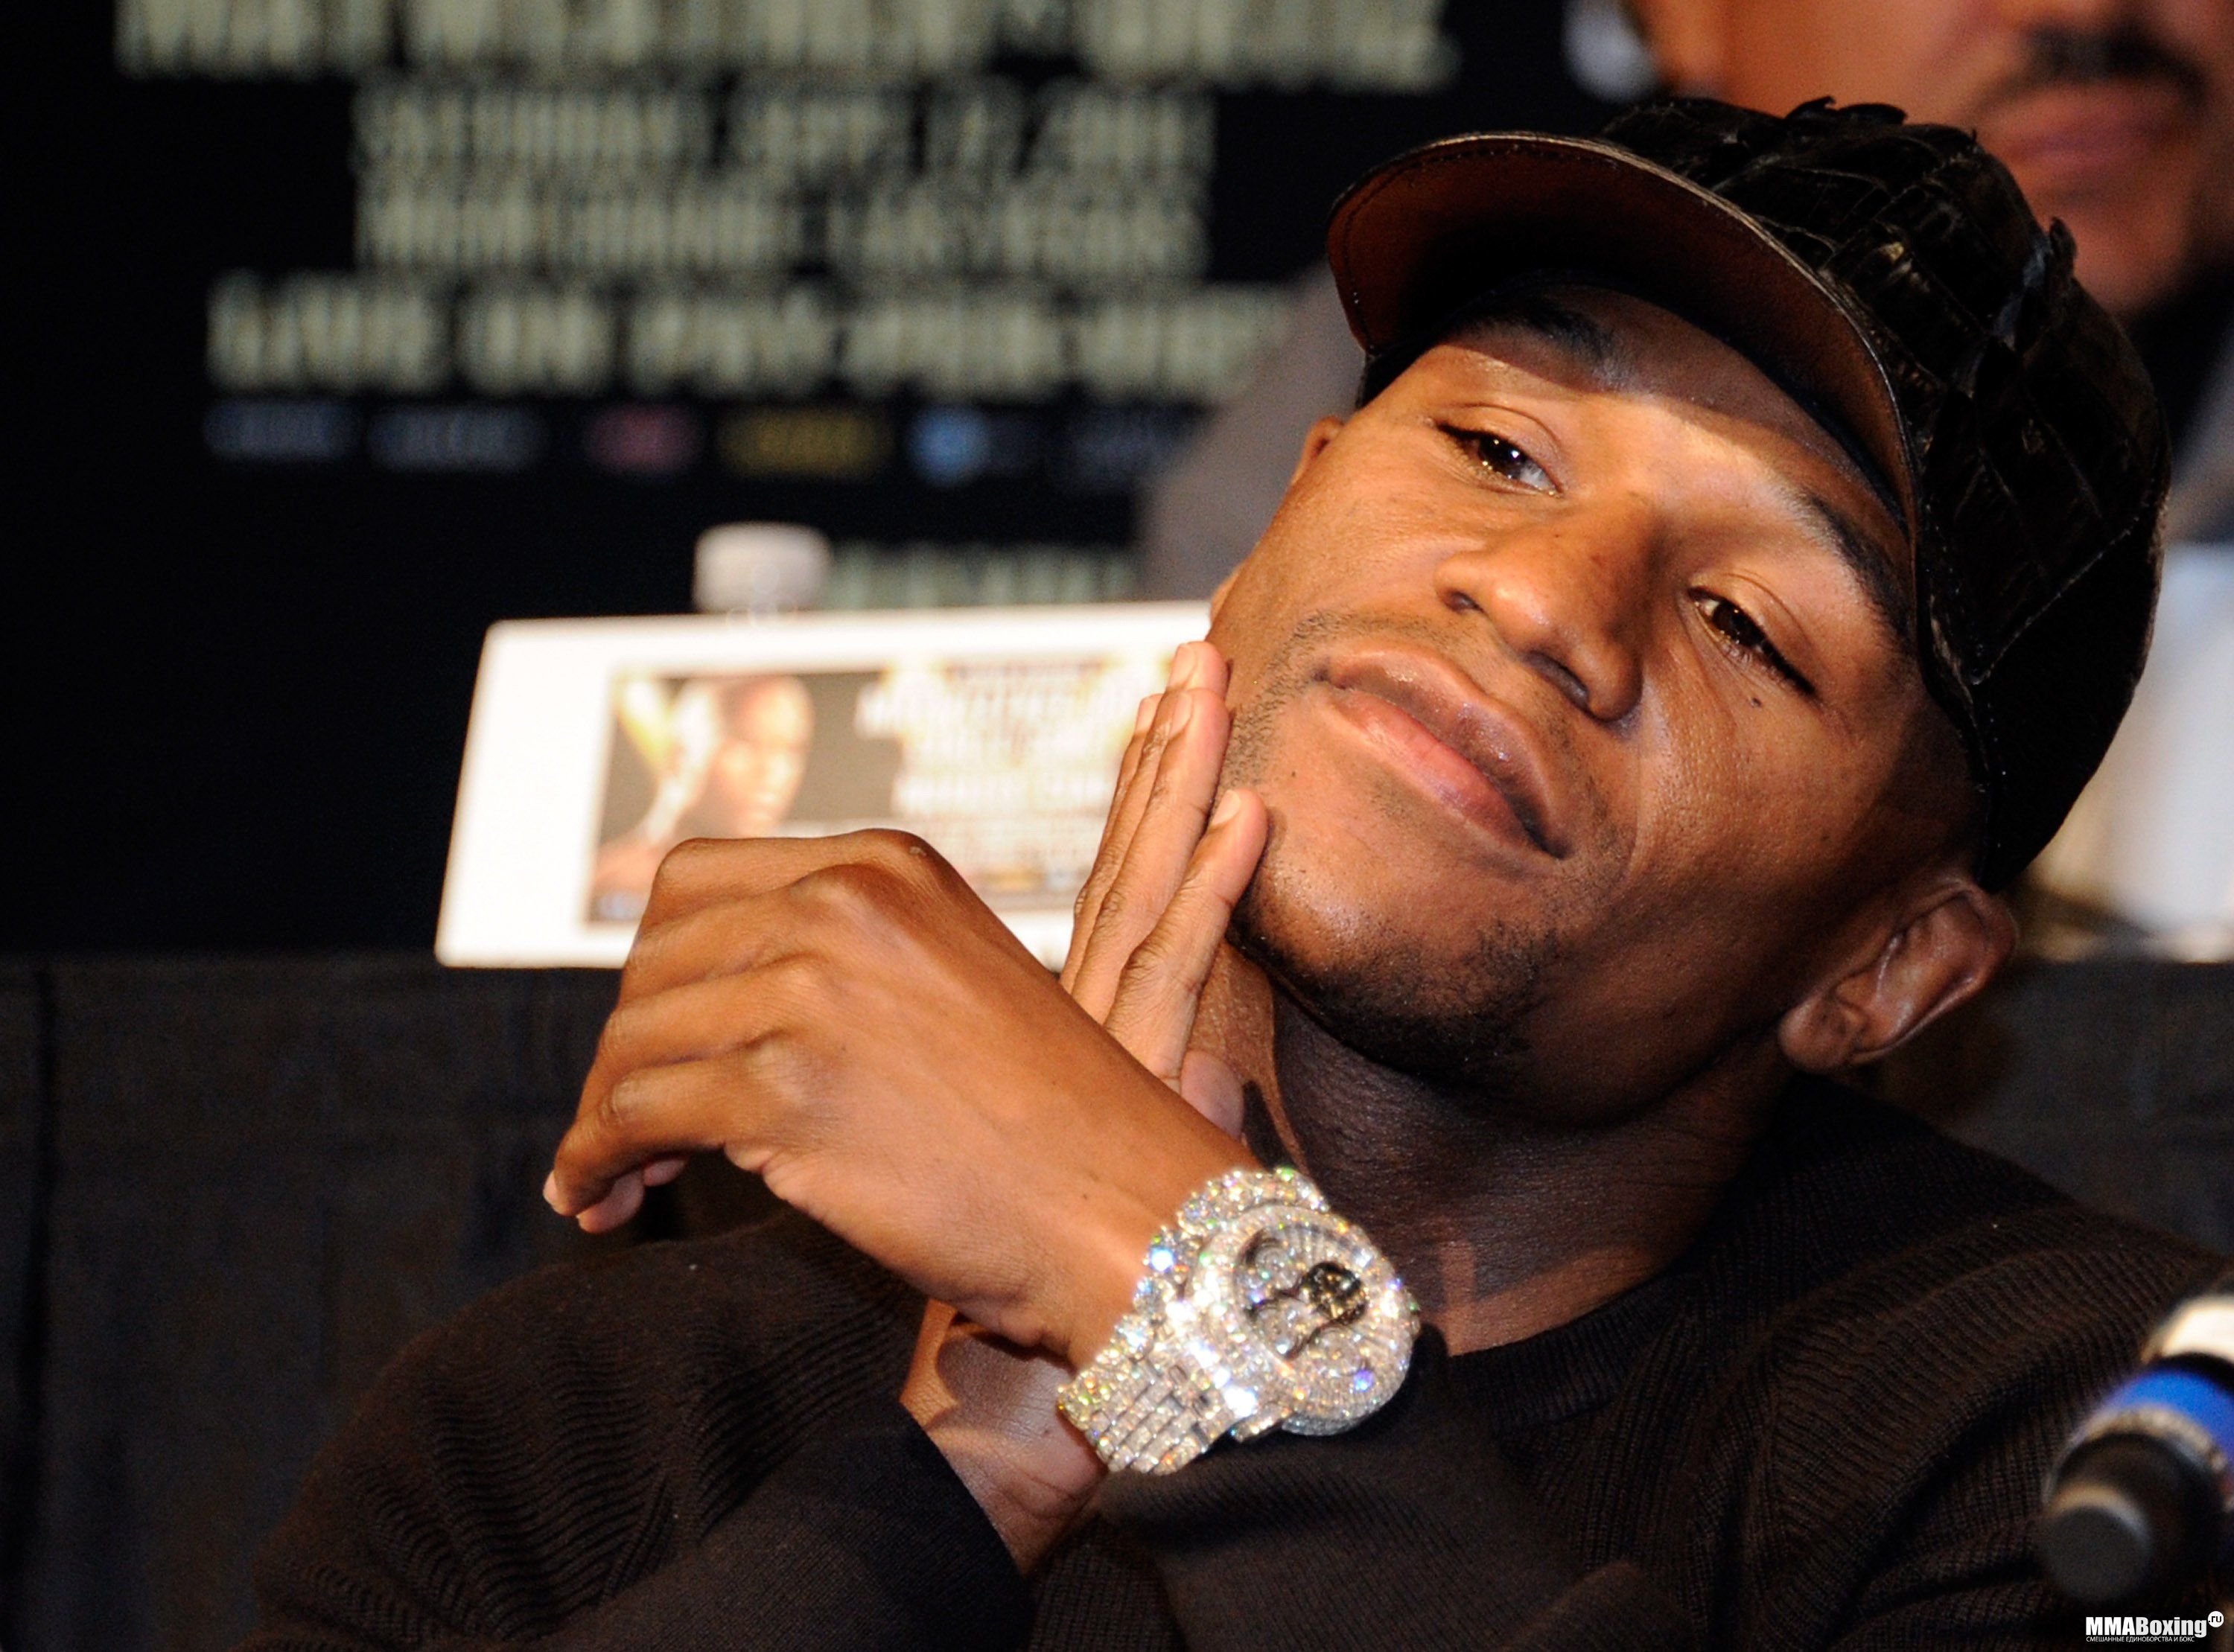 Floyd Mayweather athlete wallpapers and images - wallpapers